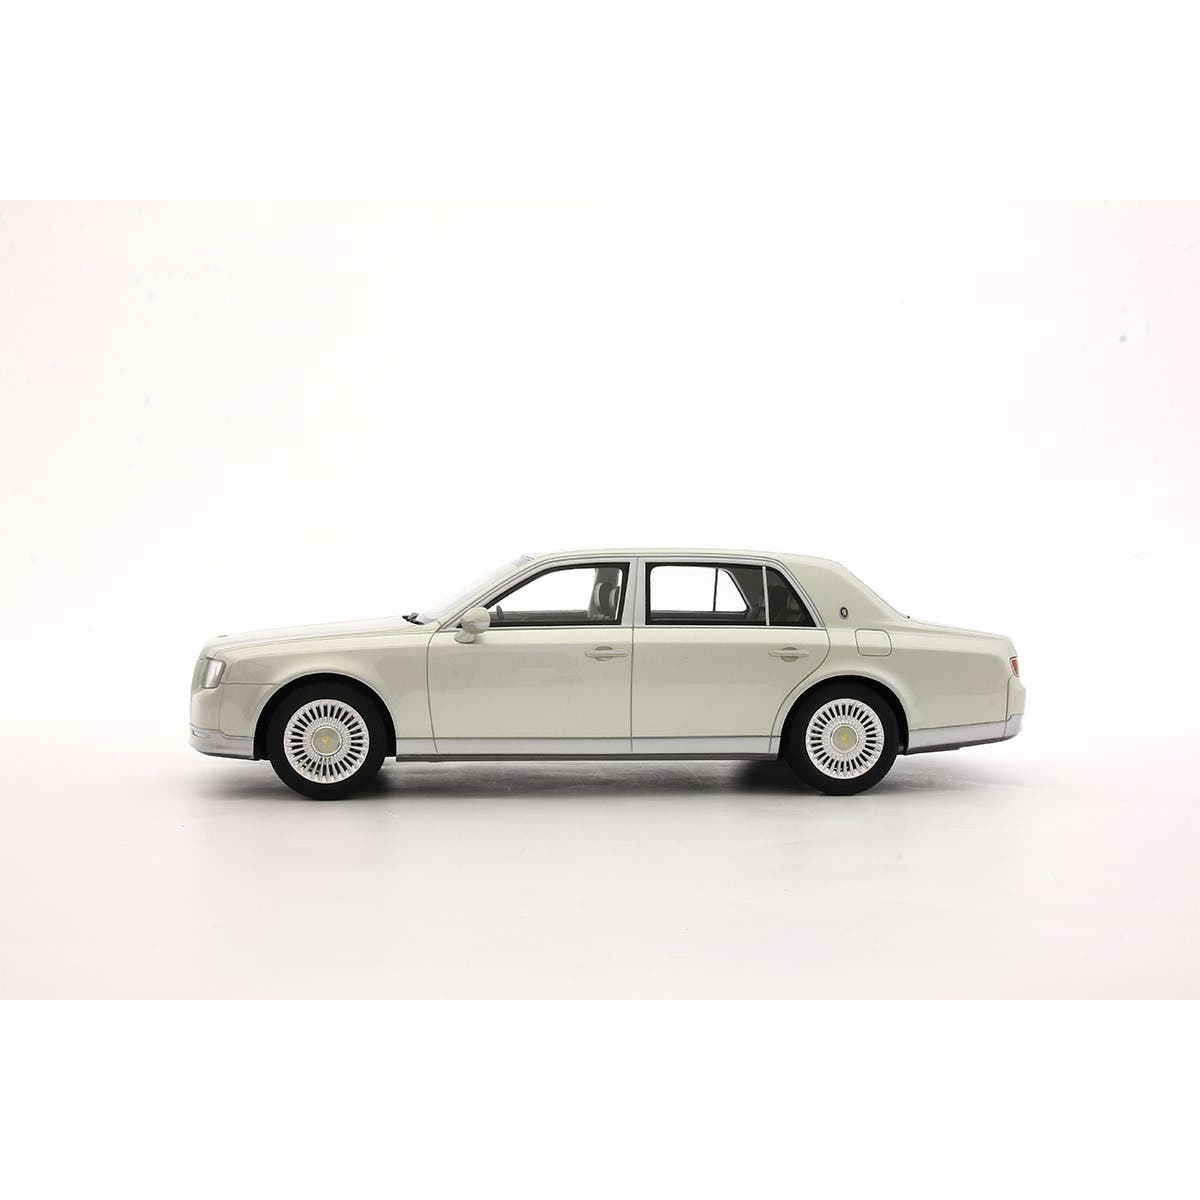 Toyota Century (Silver) - 1:18 Scale Resin Model Car